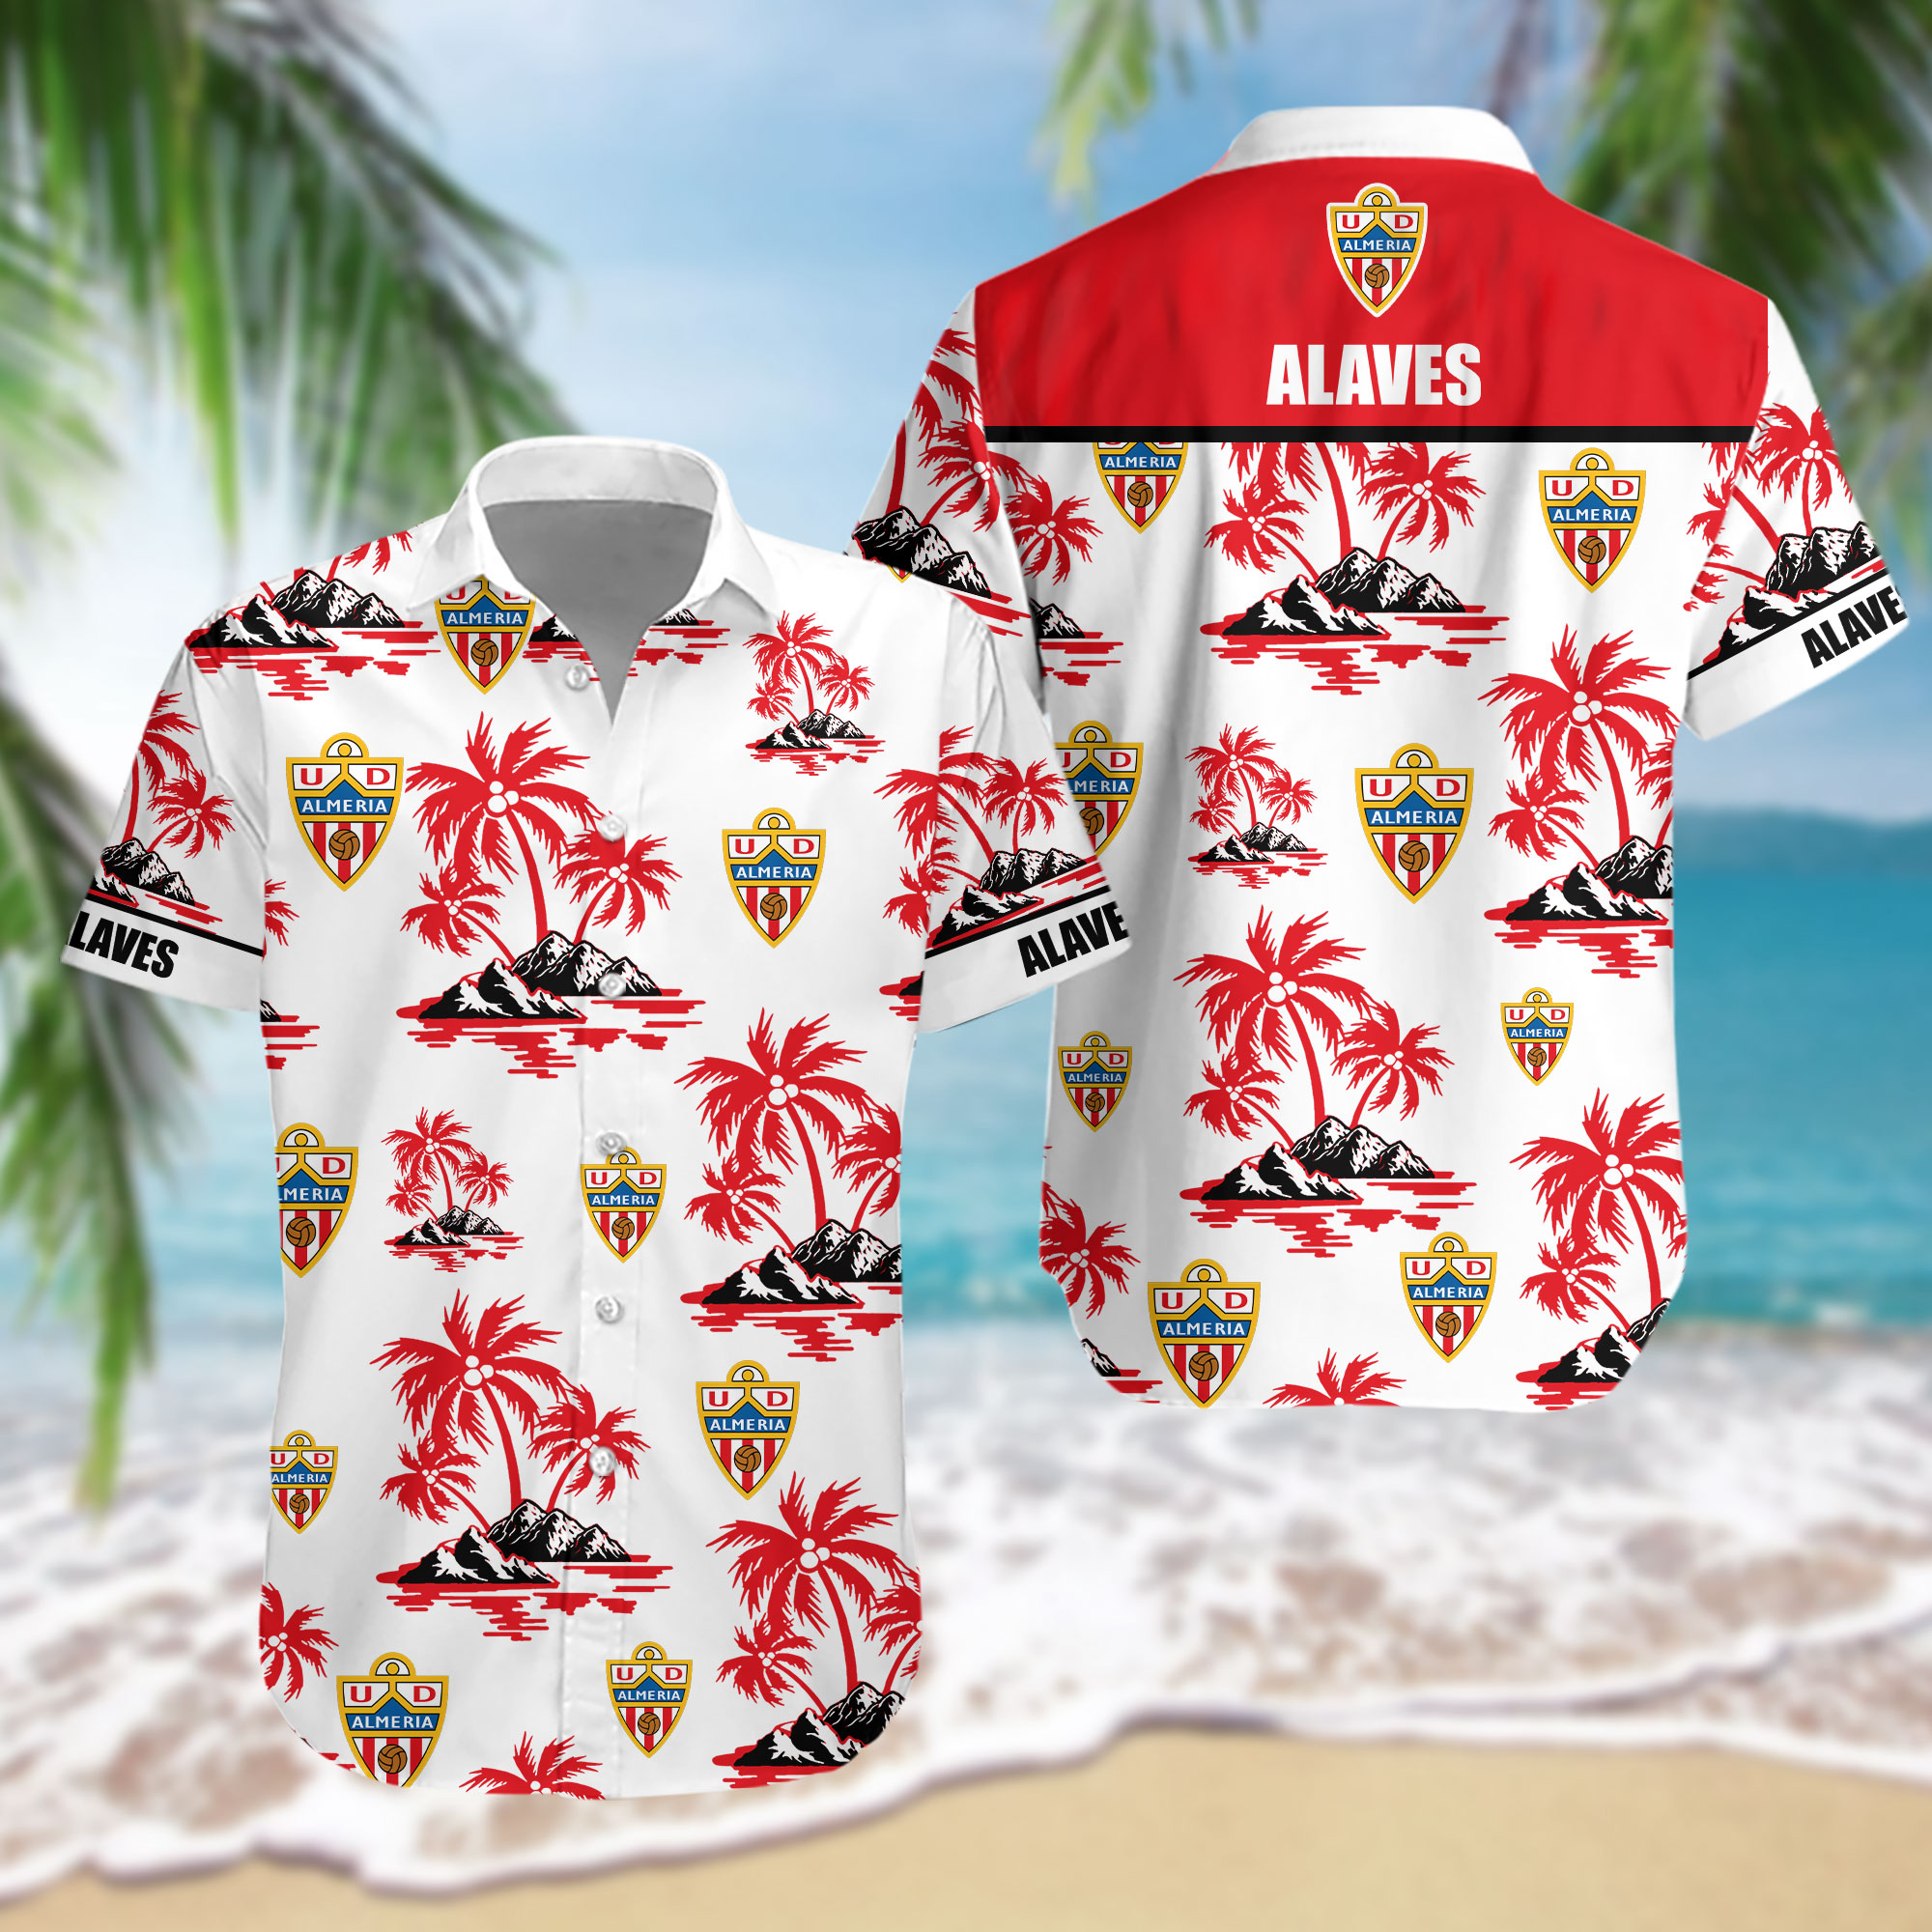 These Hawaiian Shirt will be a great choice for any type of occasion 52